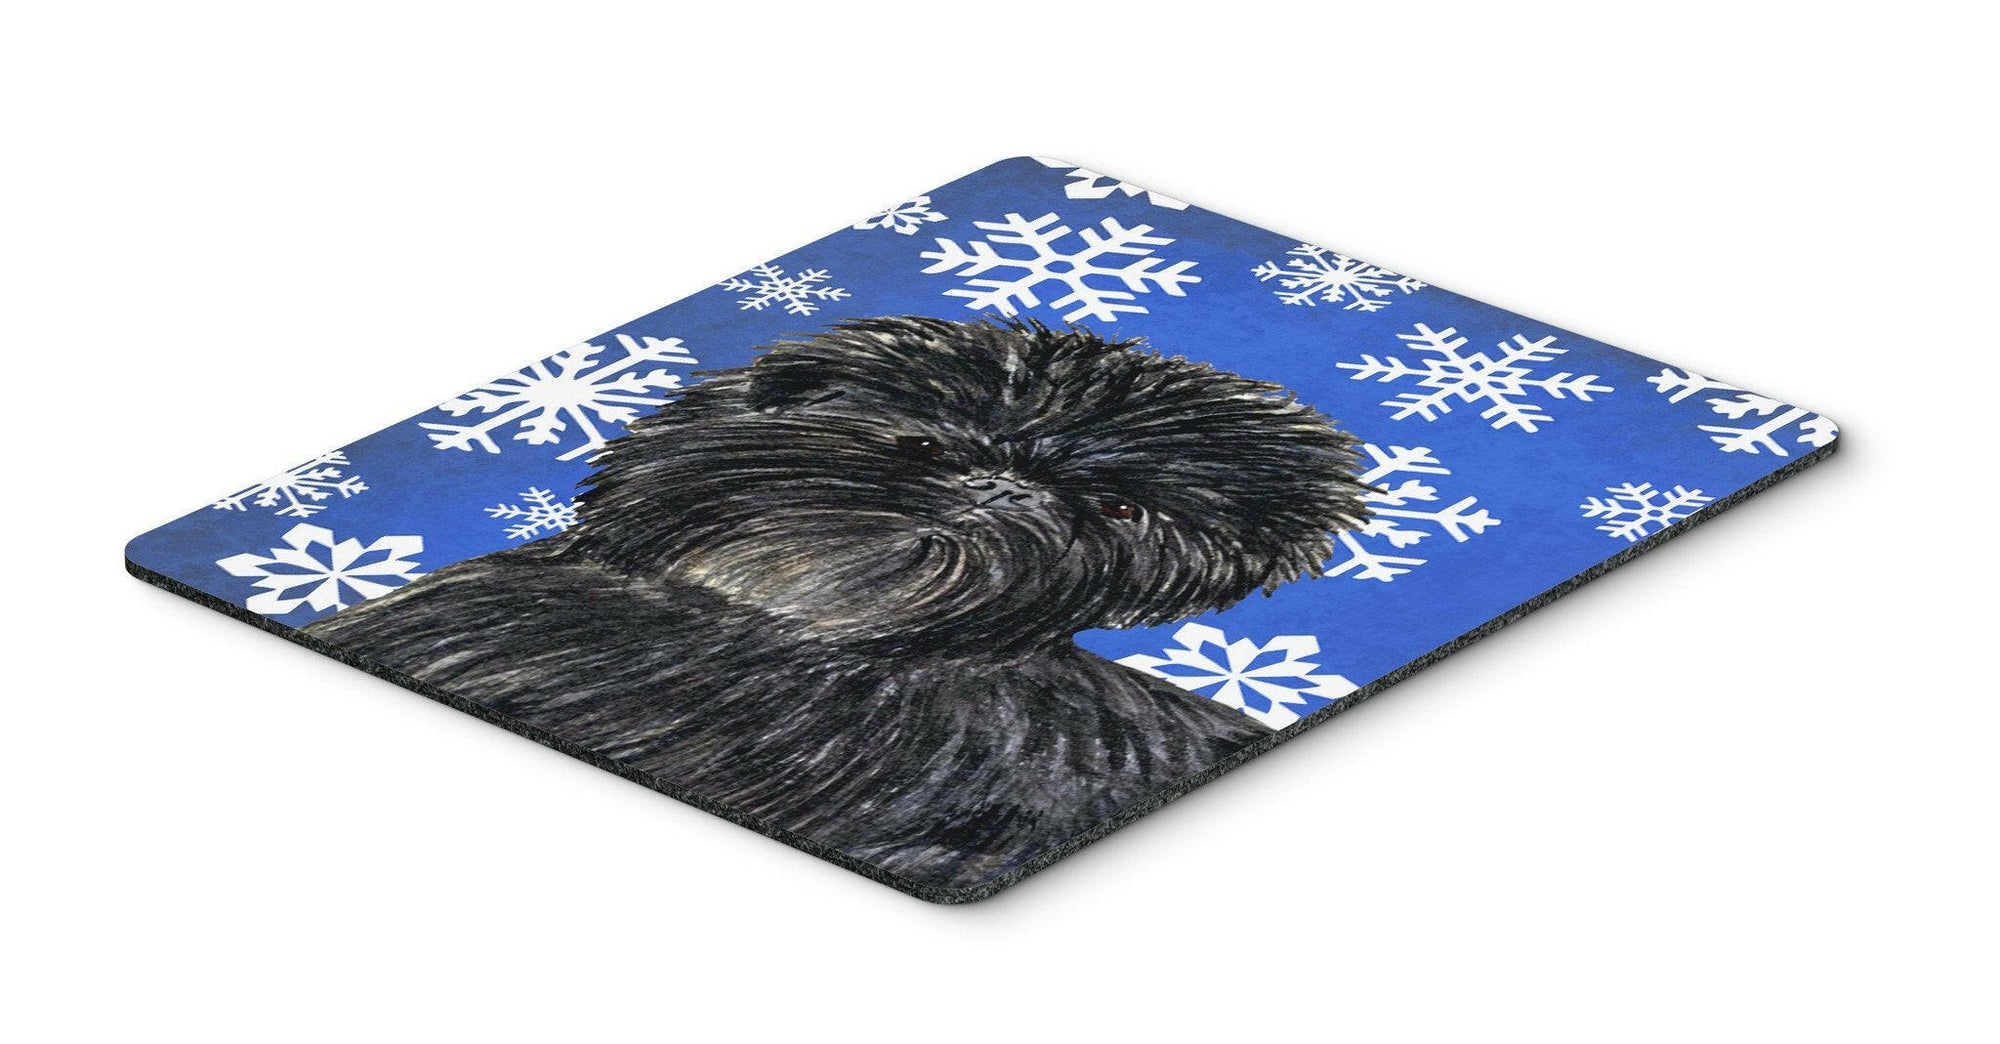 Affenpinscher Winter Snowflakes Holiday Mouse Pad, Hot Pad or Trivet by Caroline's Treasures